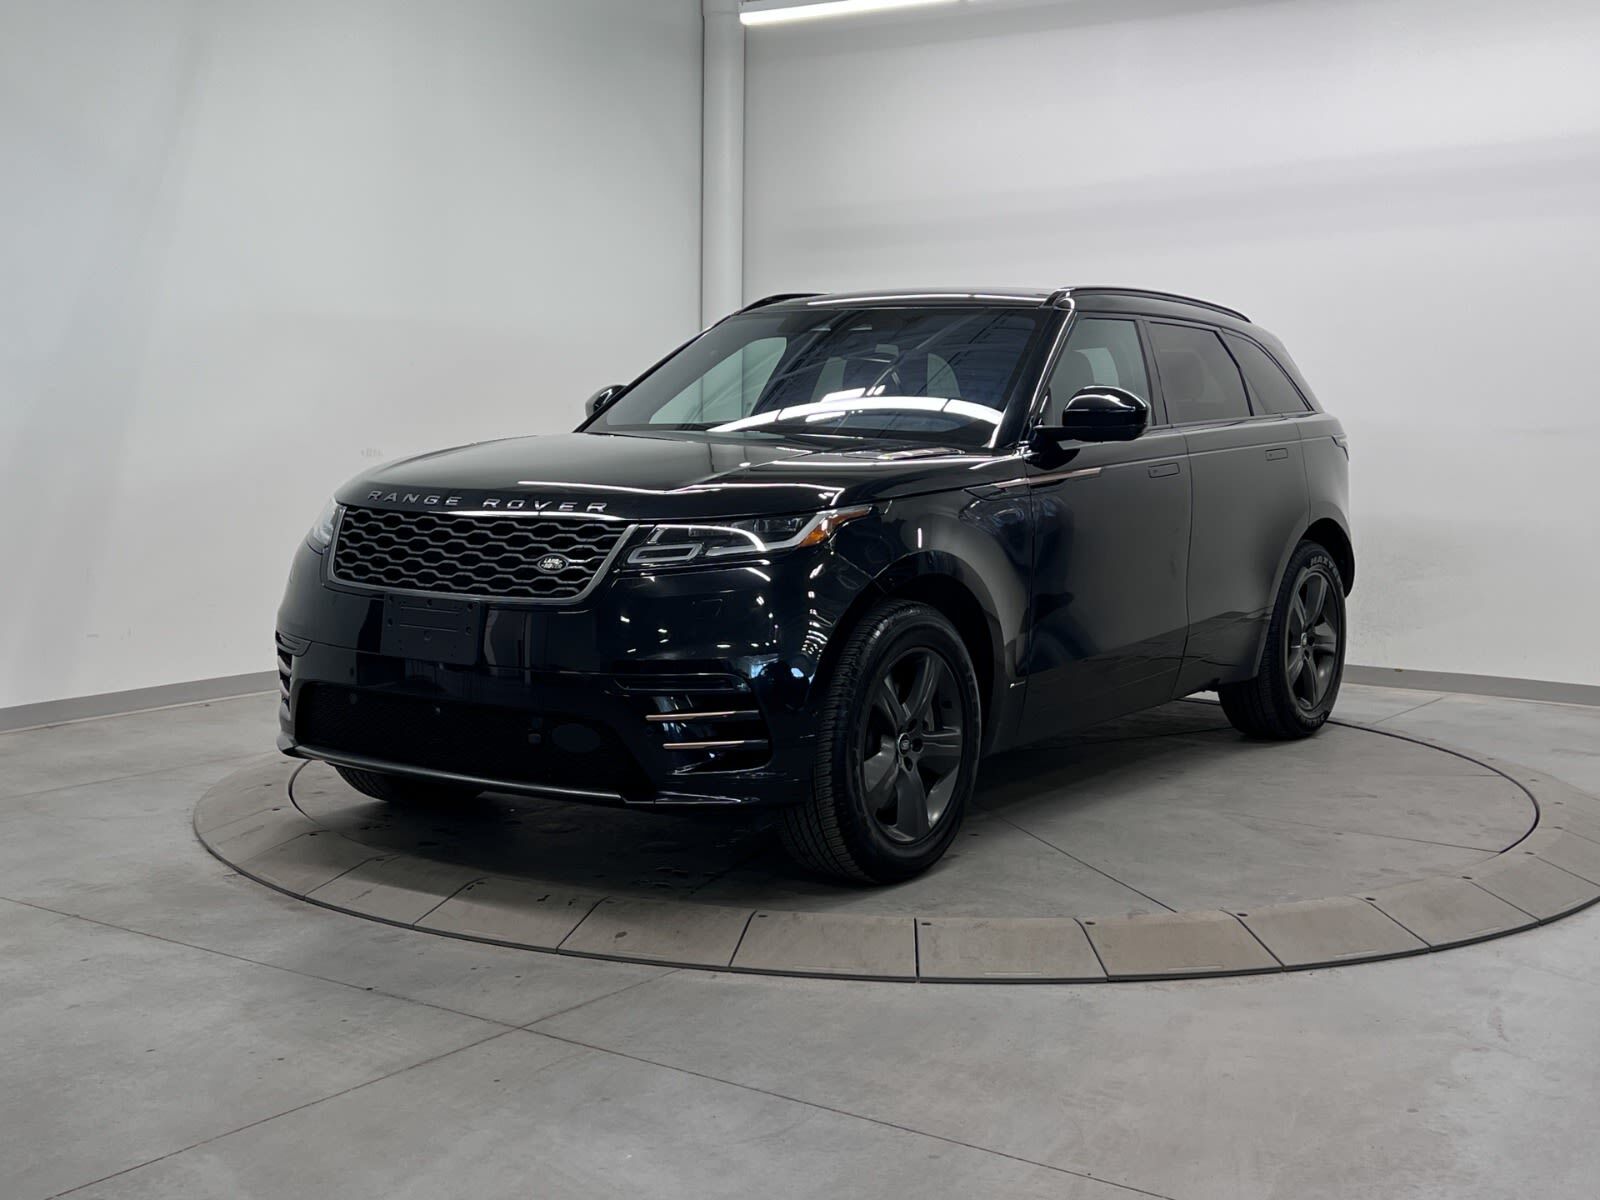 2021 Land Rover Range Rover Velar CERTIFIED PRE OWNED RATES AS LOW AS 4.99%